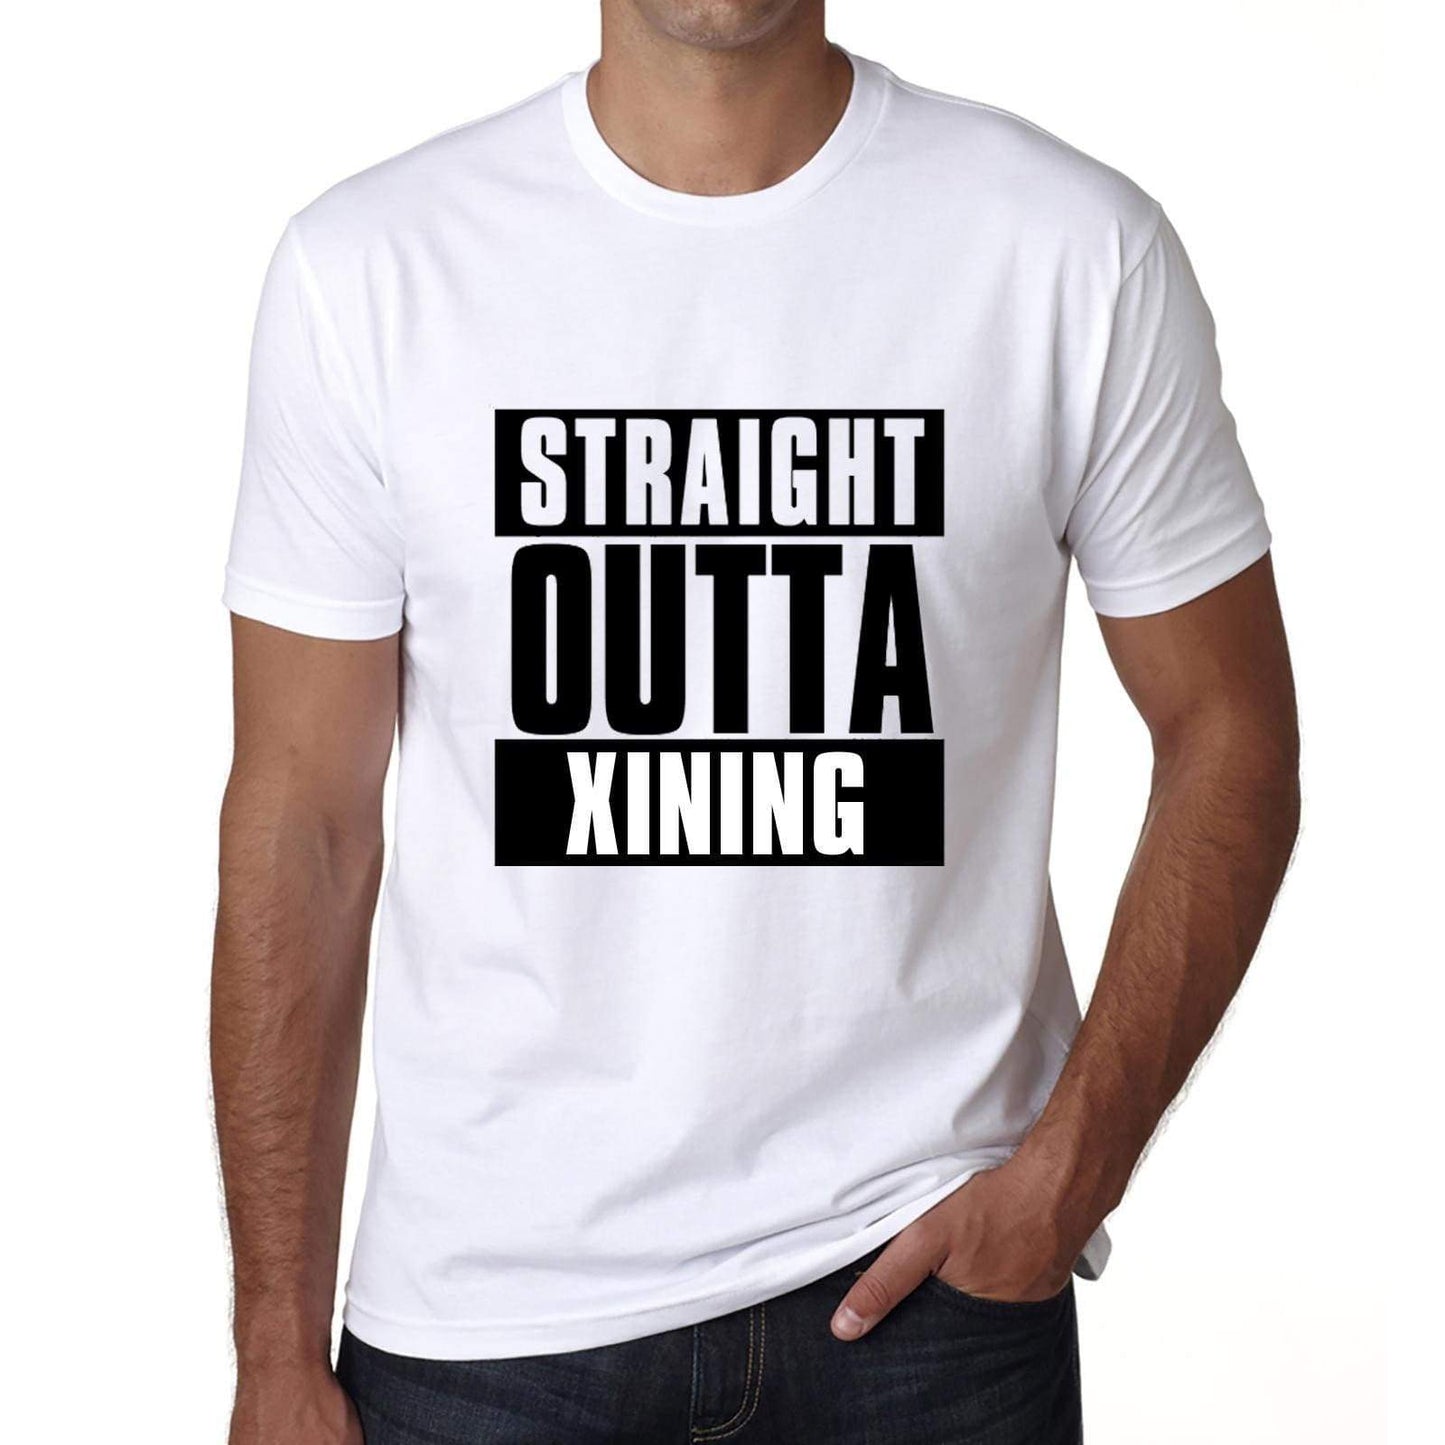 Straight Outta Xining Mens Short Sleeve Round Neck T-Shirt 00027 - White / S - Casual